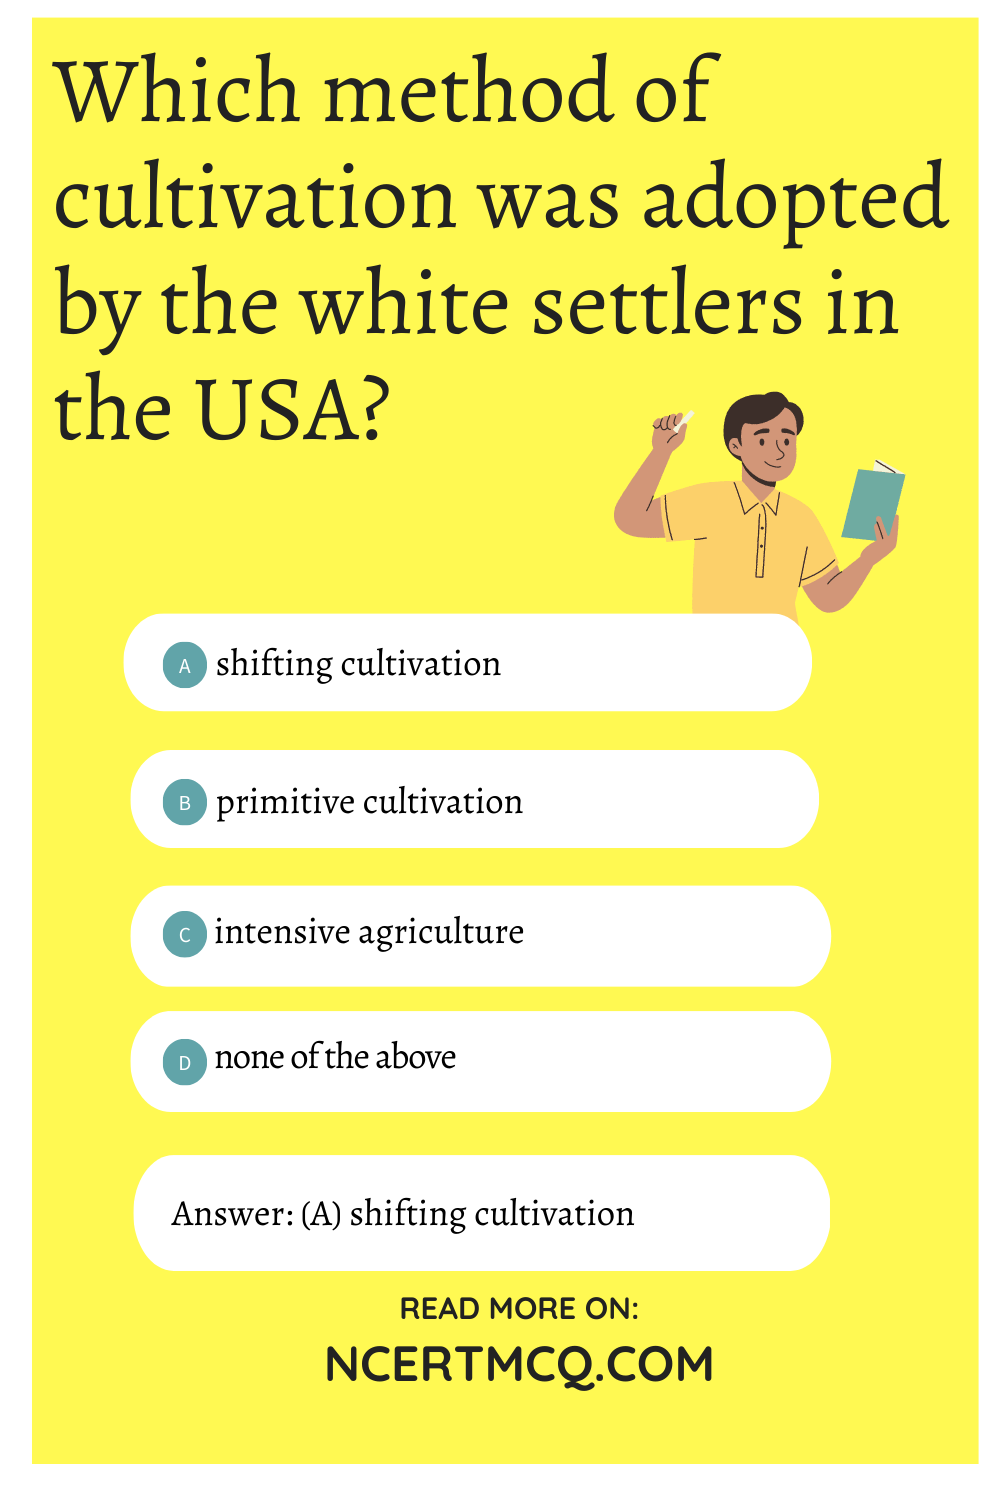 Which method of cultivation was adopted by the white settlers in the USA?